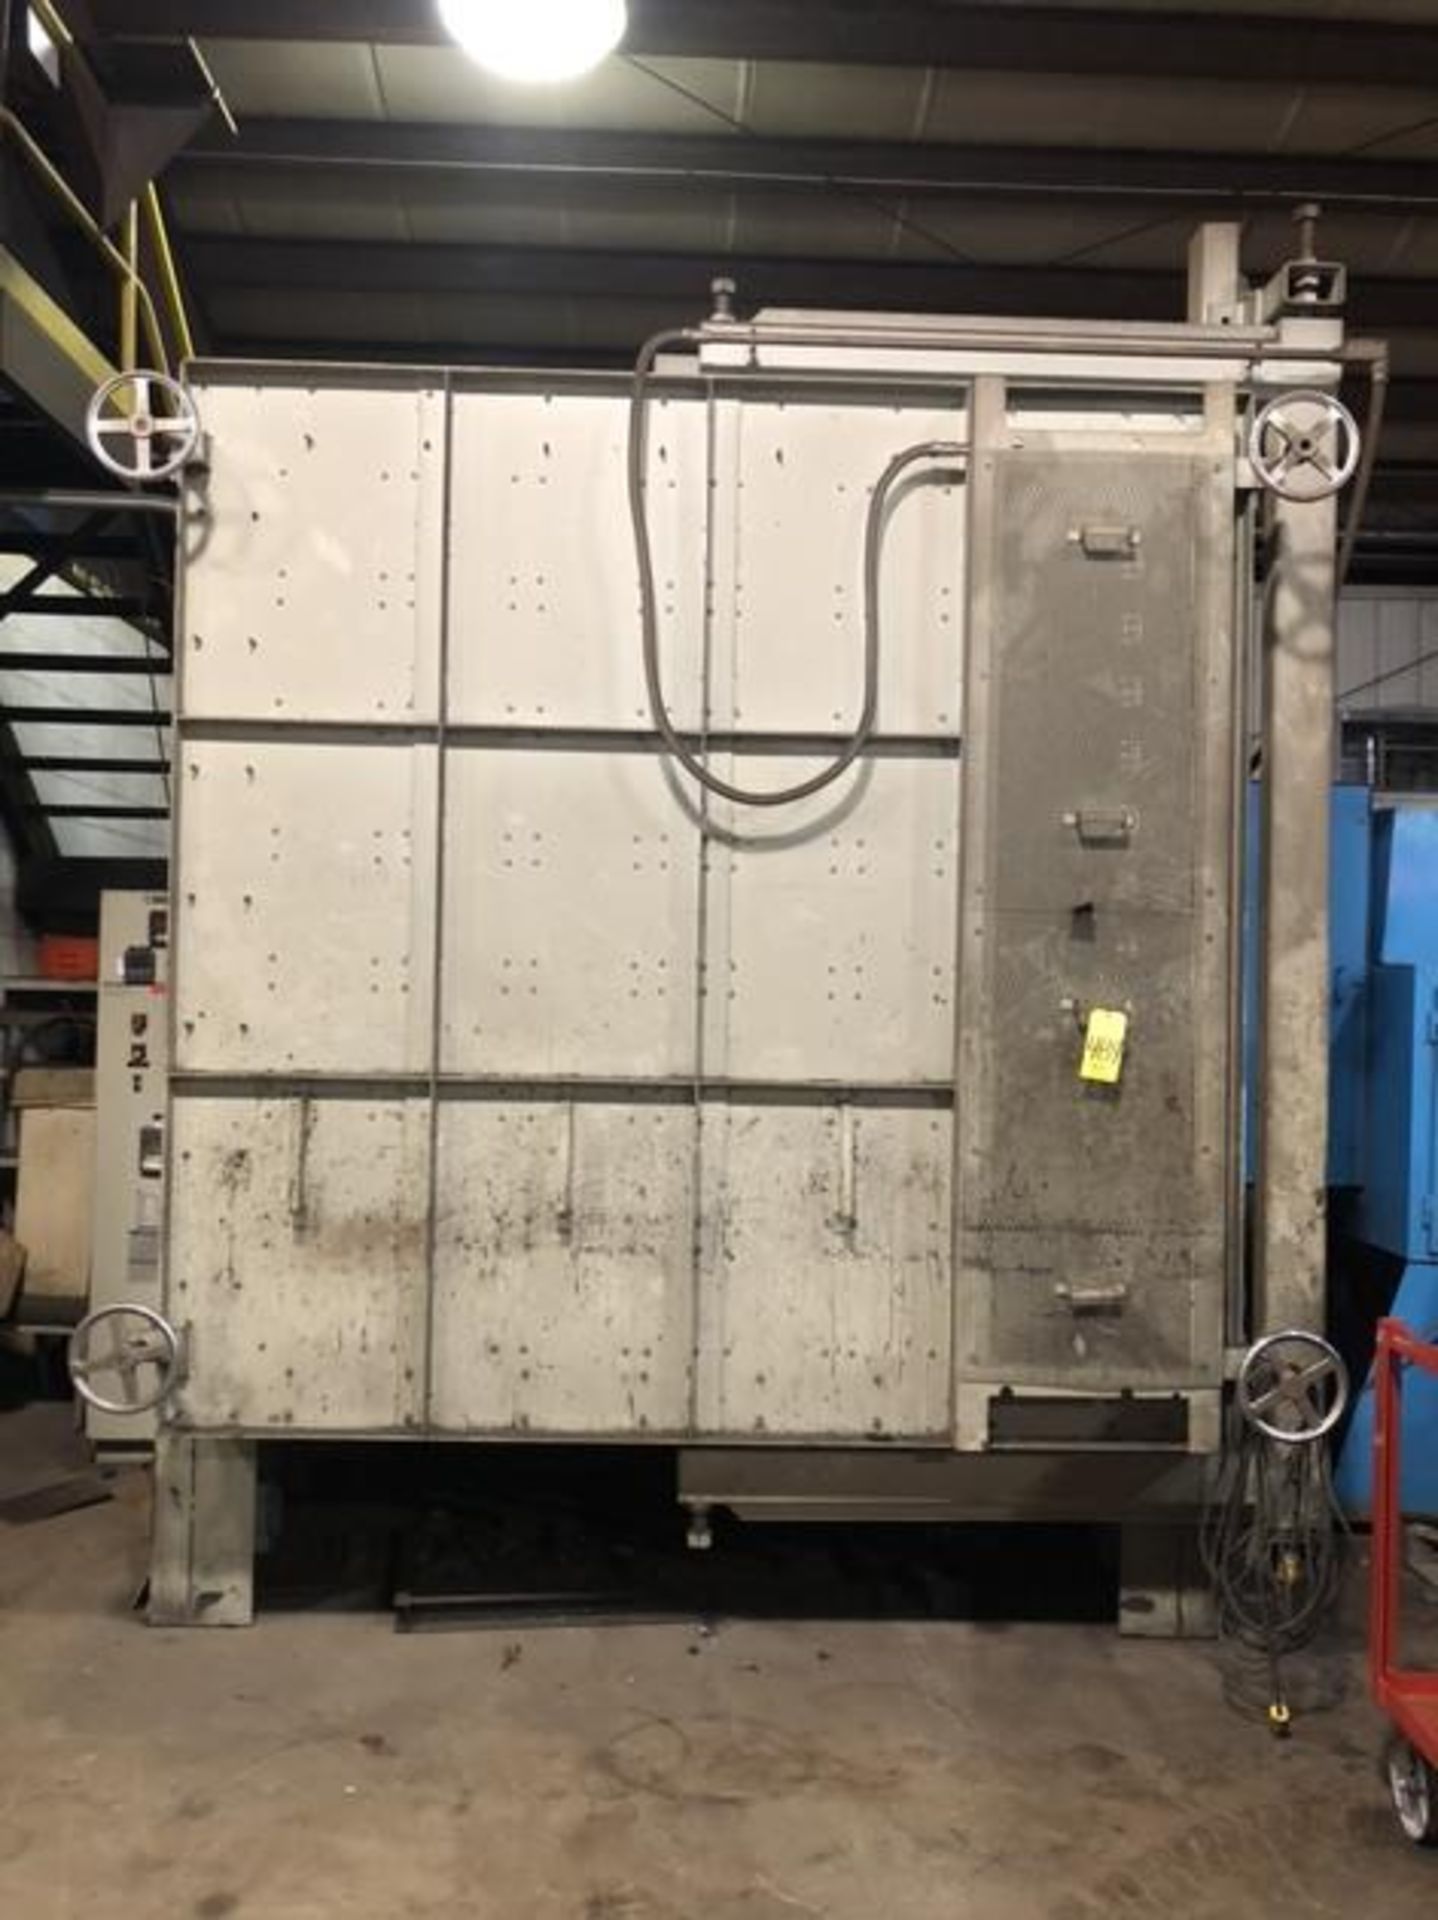 1996 L & L SPECIAL FURNACE INDUSTRIAL OVEN, MDL.FB777-FA11-01-G394-480R39H96, S/N H496LN, 1800 DEG - Image 2 of 4